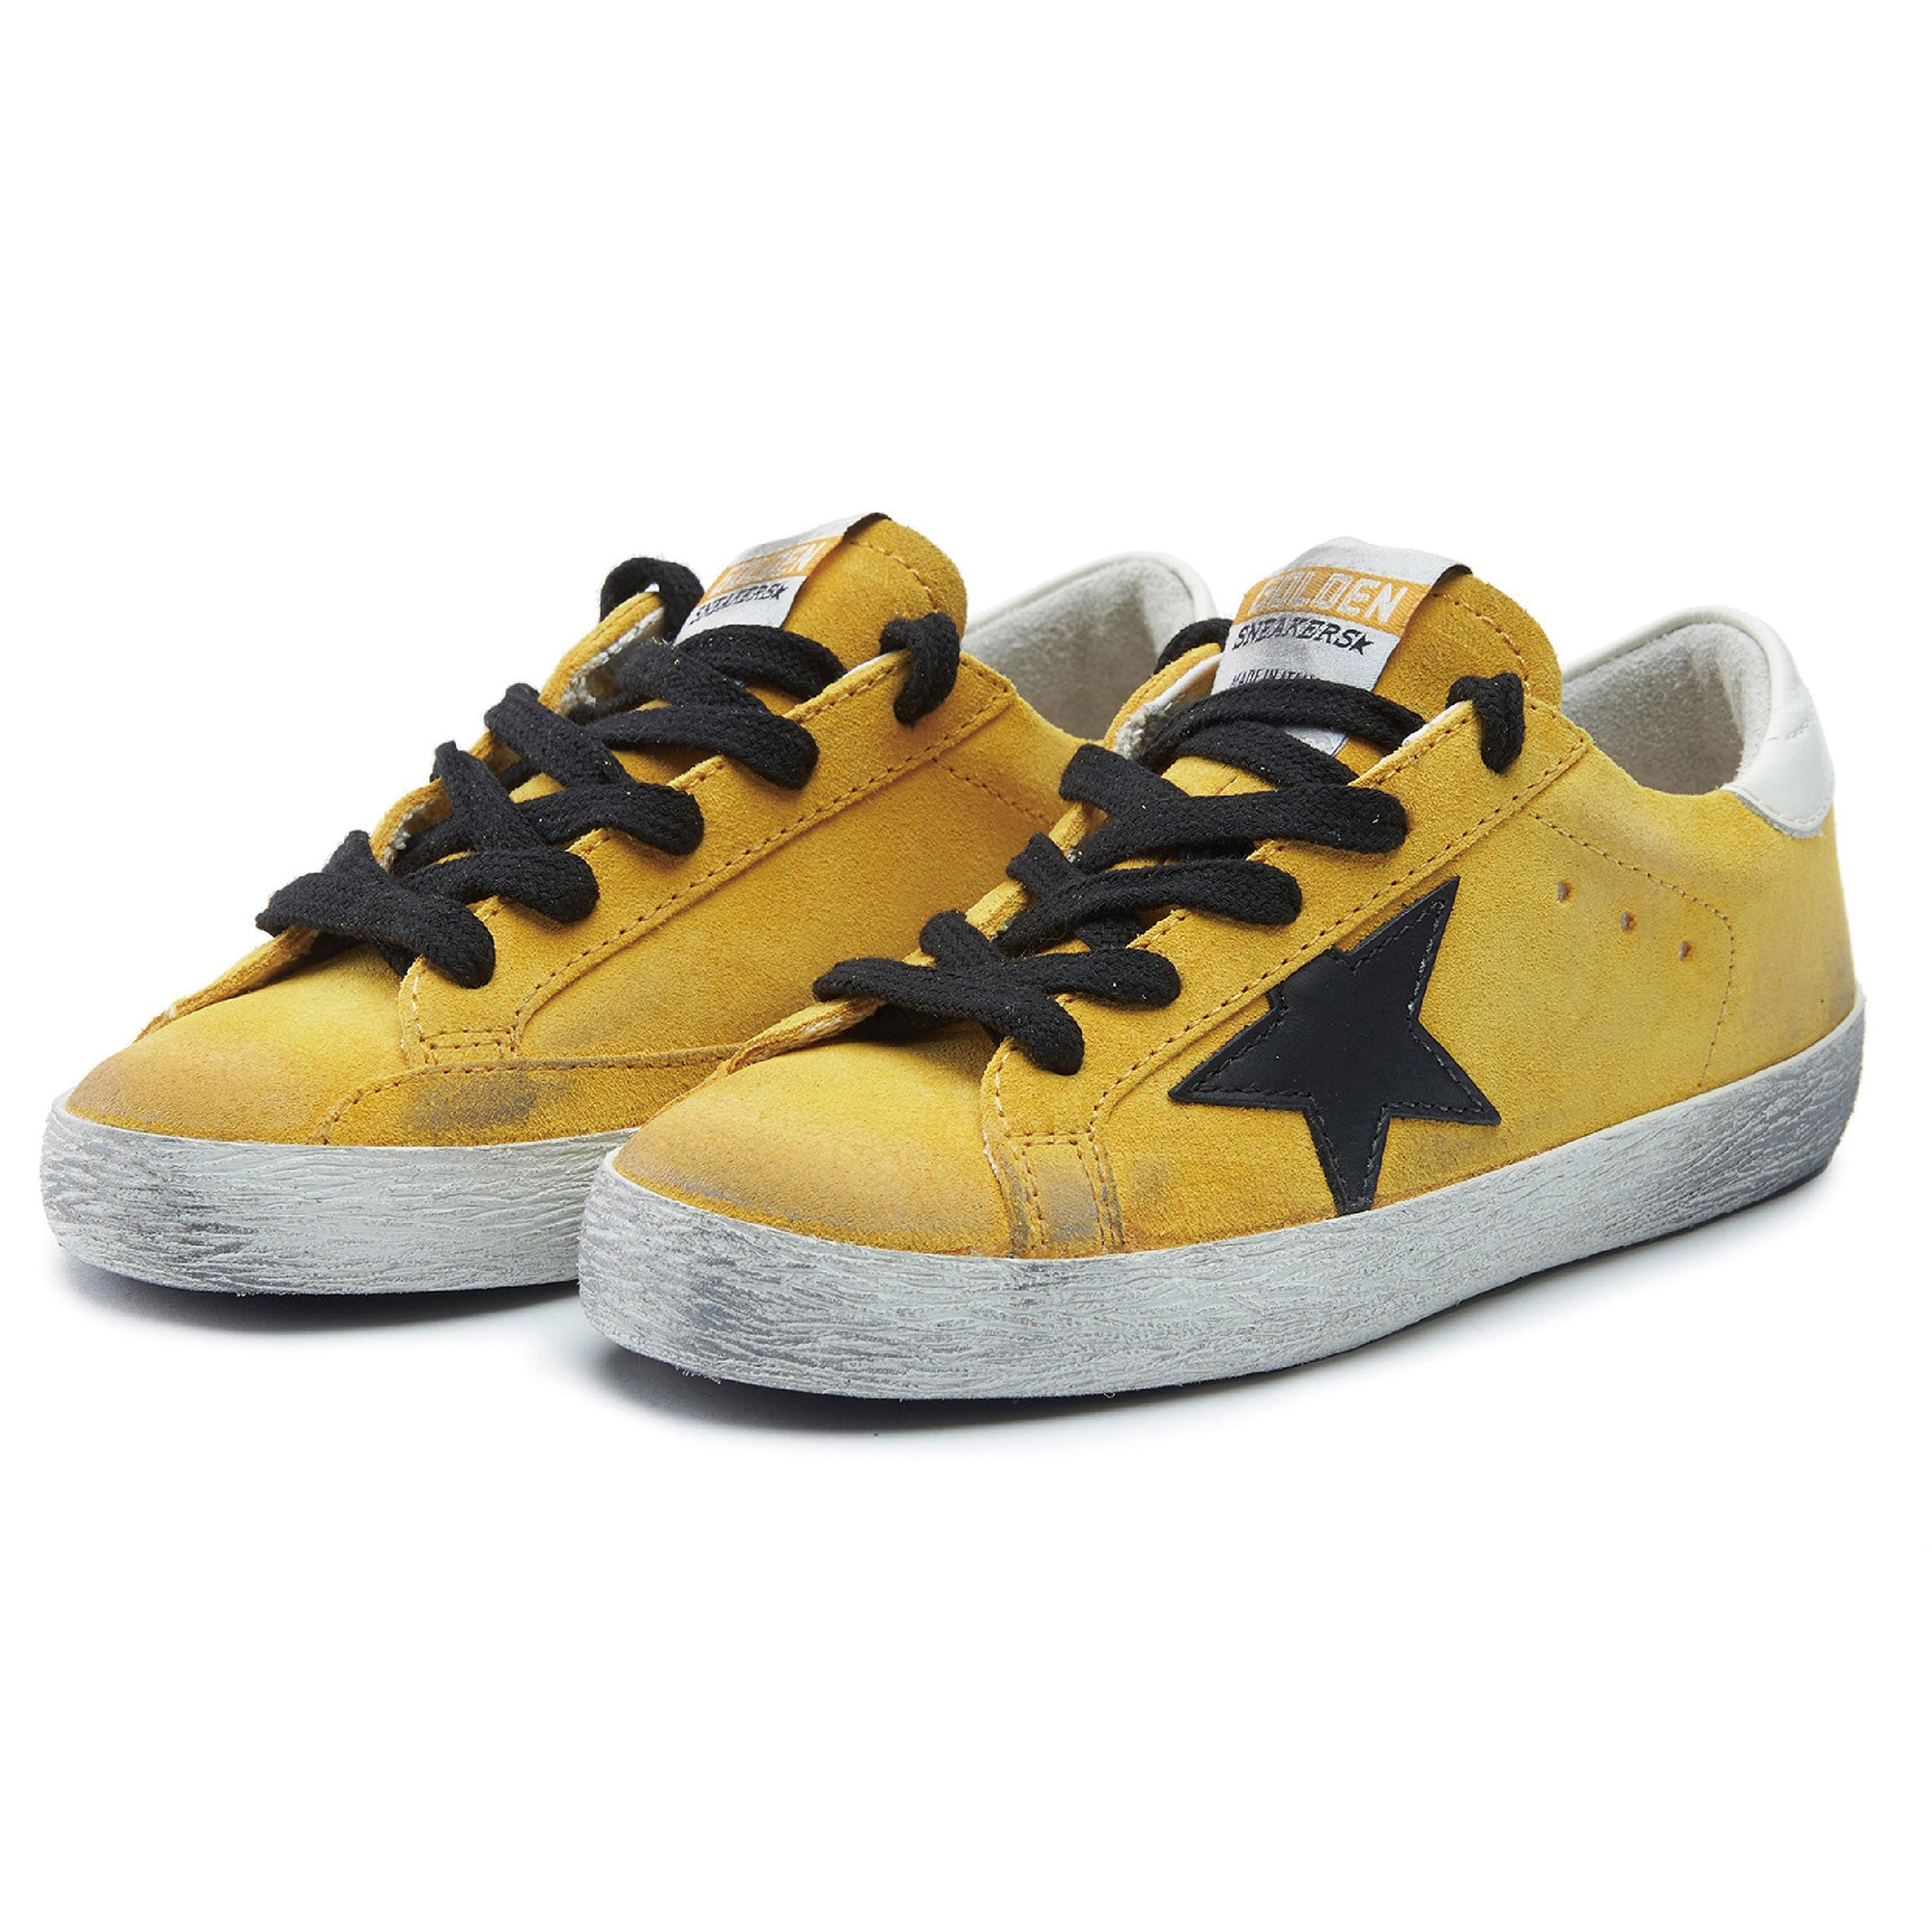 Boys & Girls Yellow & Black Star Leather Shoes